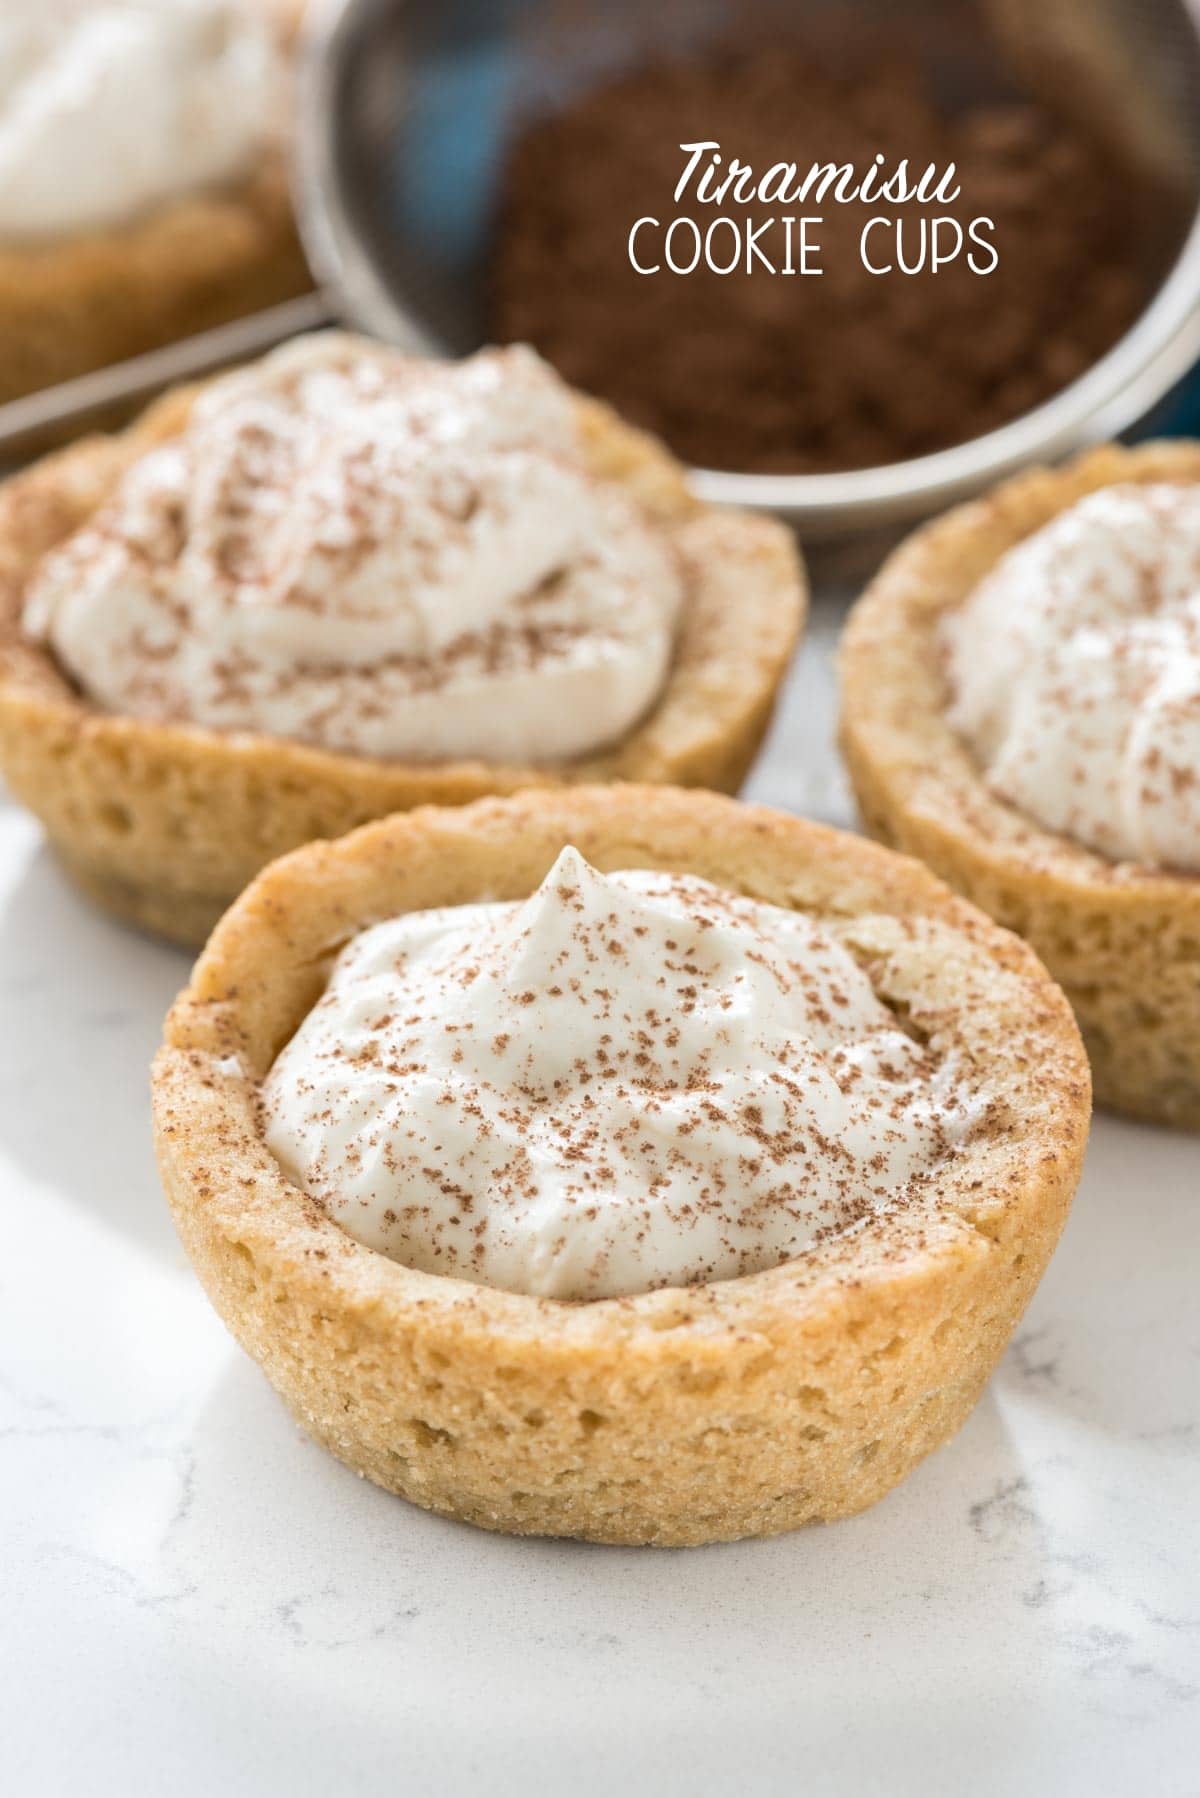 Tiramisu Cookie Cups - these easy from scratch sugar cookie cups are filled with my favorite tiramisu mousse! My family loved them!